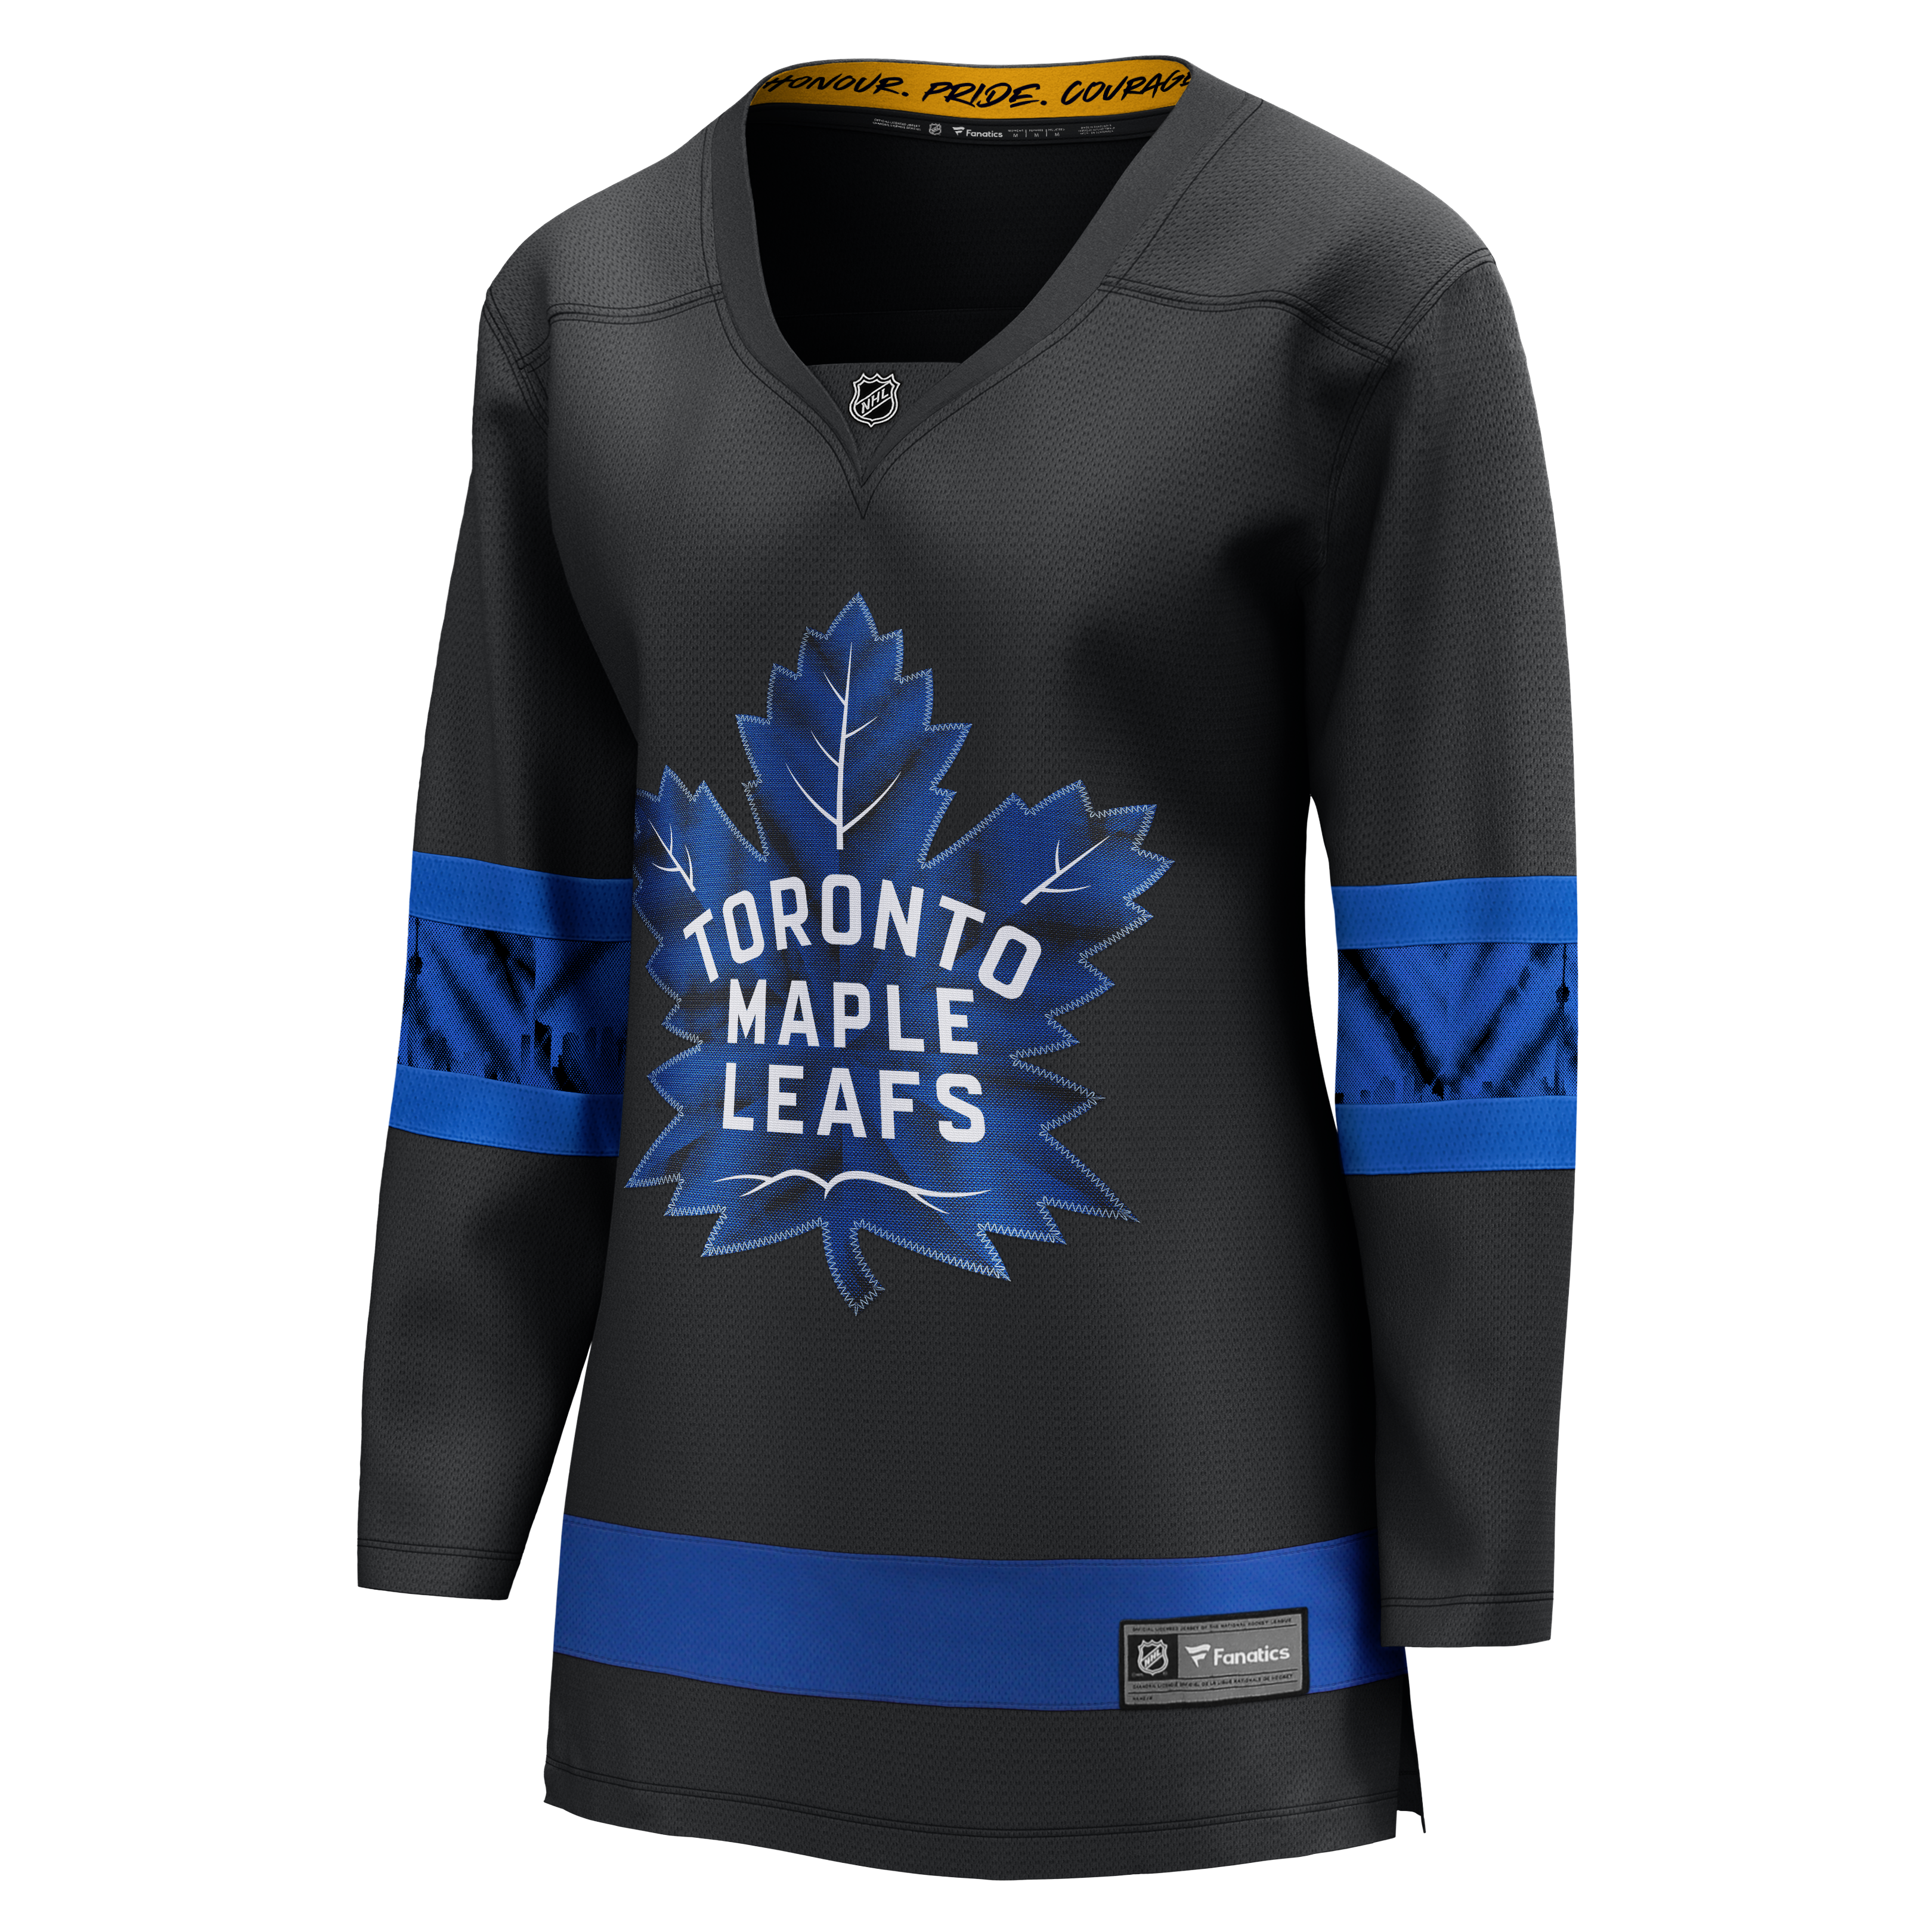 Discounted Women's Toronto Maple Leafs Gear, Cheap Womens Maple Leafs  Apparel, Clearance Ladies Maple Leafs Outfits